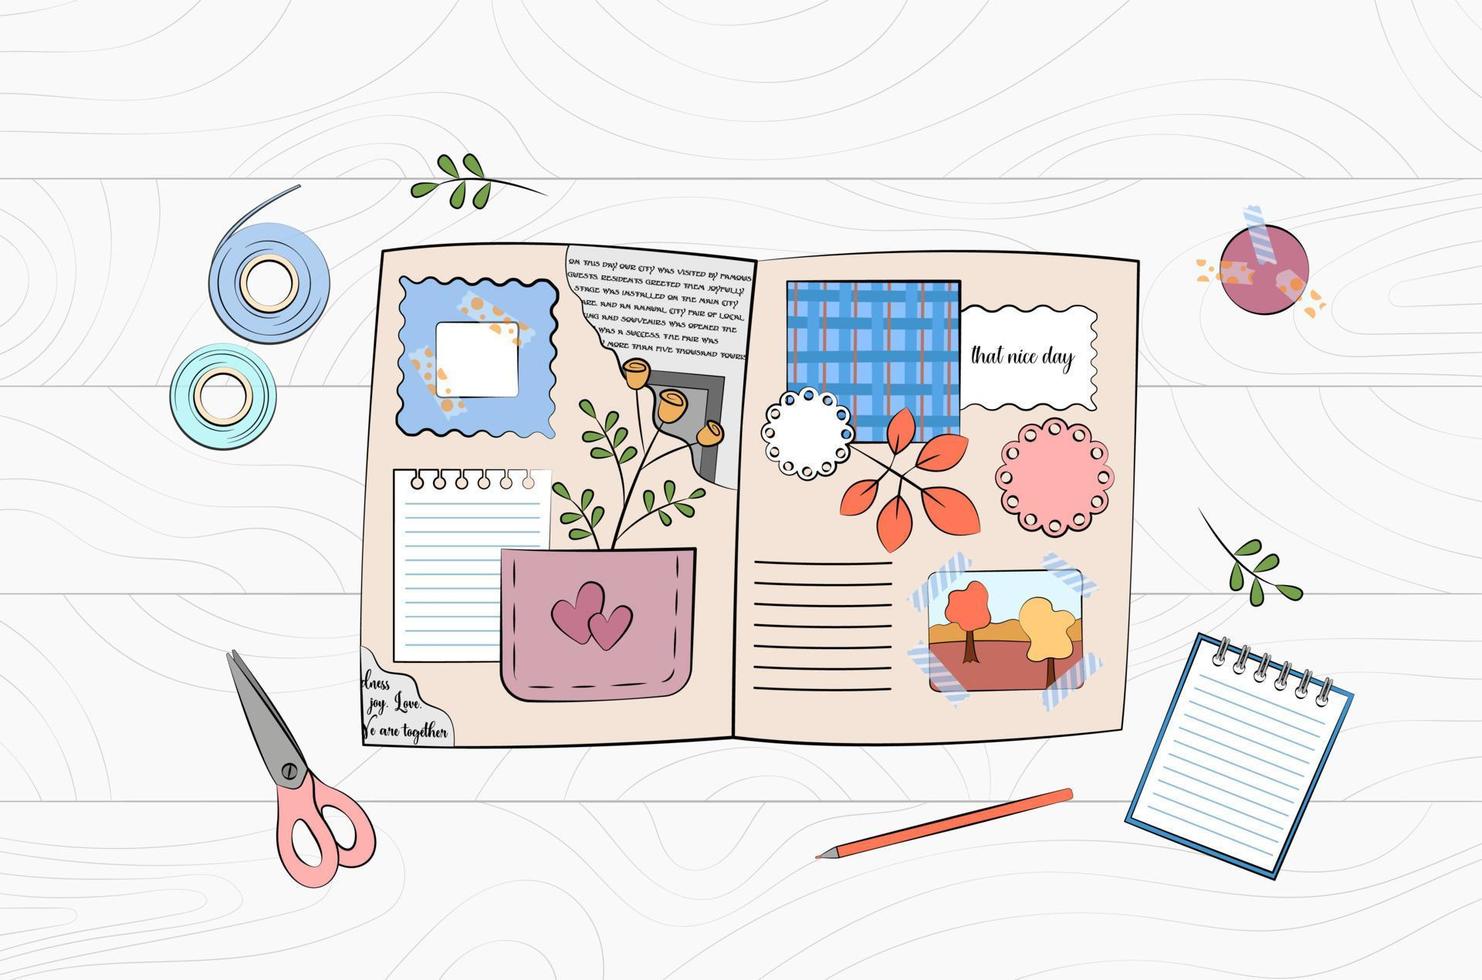 Scrapbooking workplace top view. Scrapbook elements, tools and stationery on wooden table. Journaling hobby. Book with newspaper clipping, photo, notes, leaves. Vector illustration